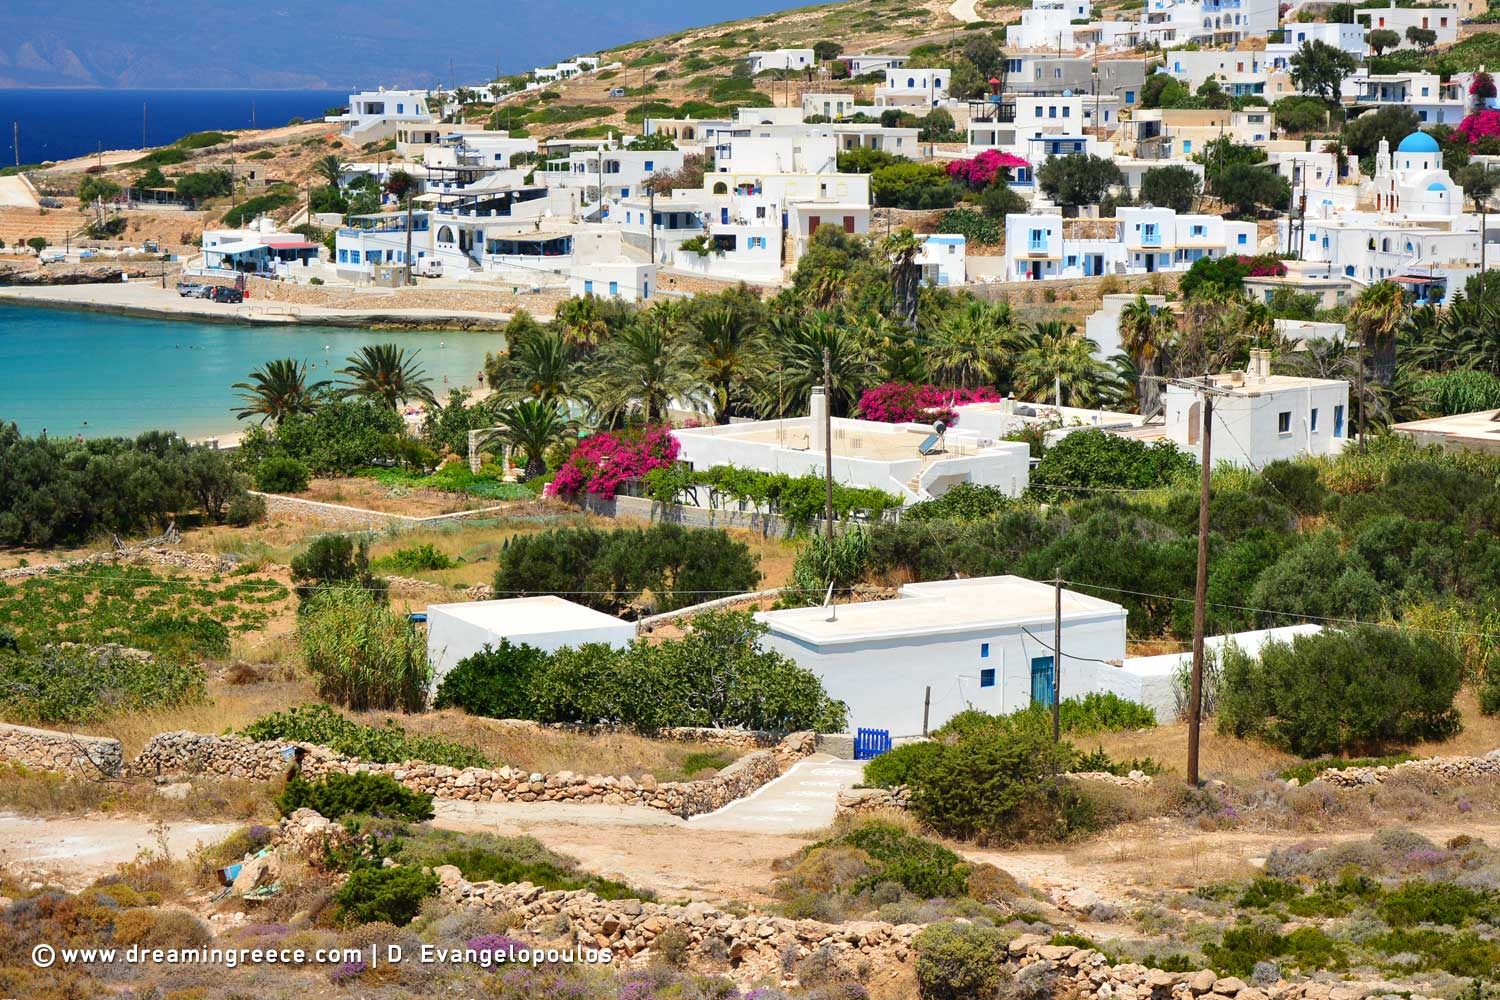 Holidays in Donousa island Small Cyclades Vacations Greece